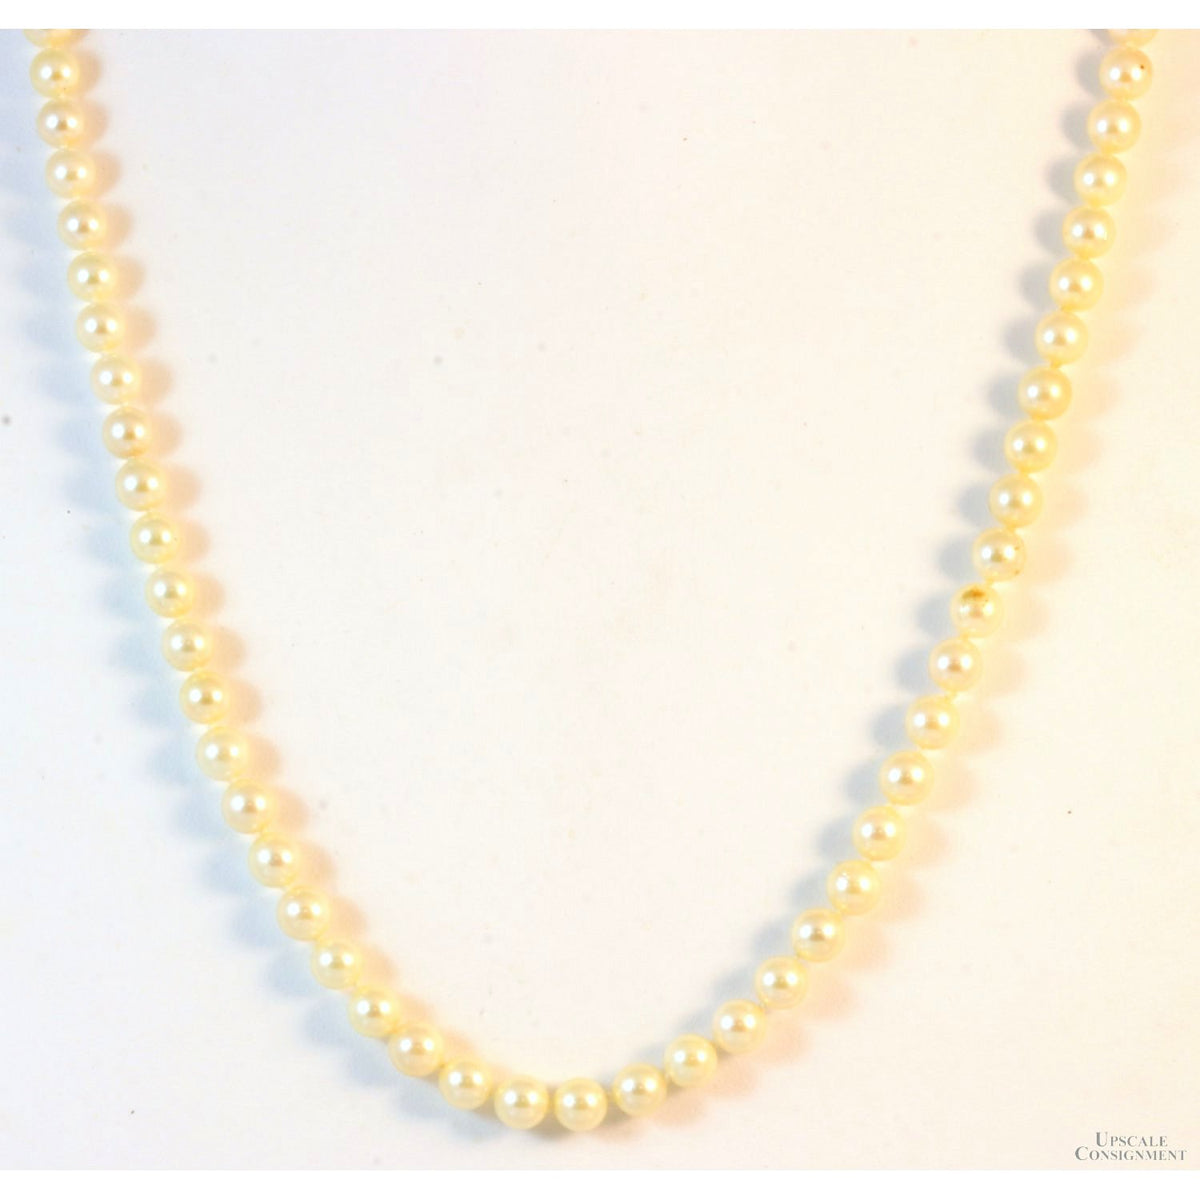 Cultured Freshwater Pearl 24" Strand - 14K Yellow Gold Clasp